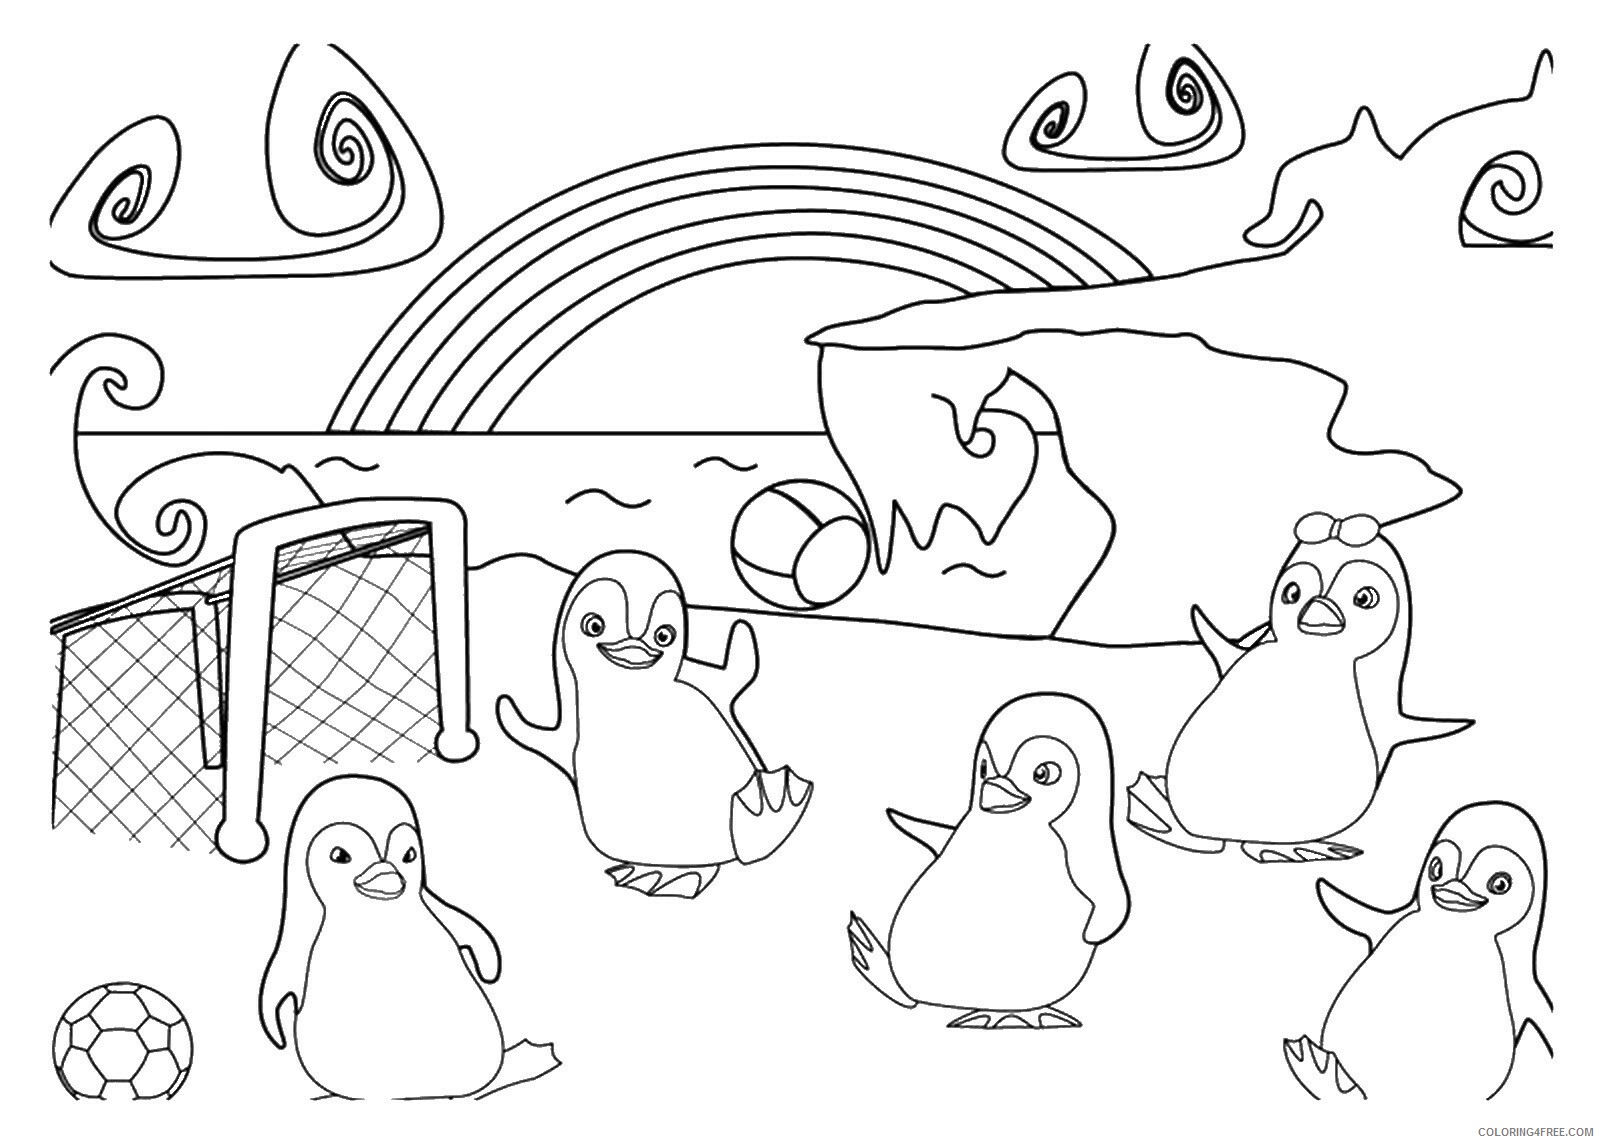 Ozie Boo Coloring Pages TV Film Ozie_Boo_cl_15 Printable 2020 05867 Coloring4free